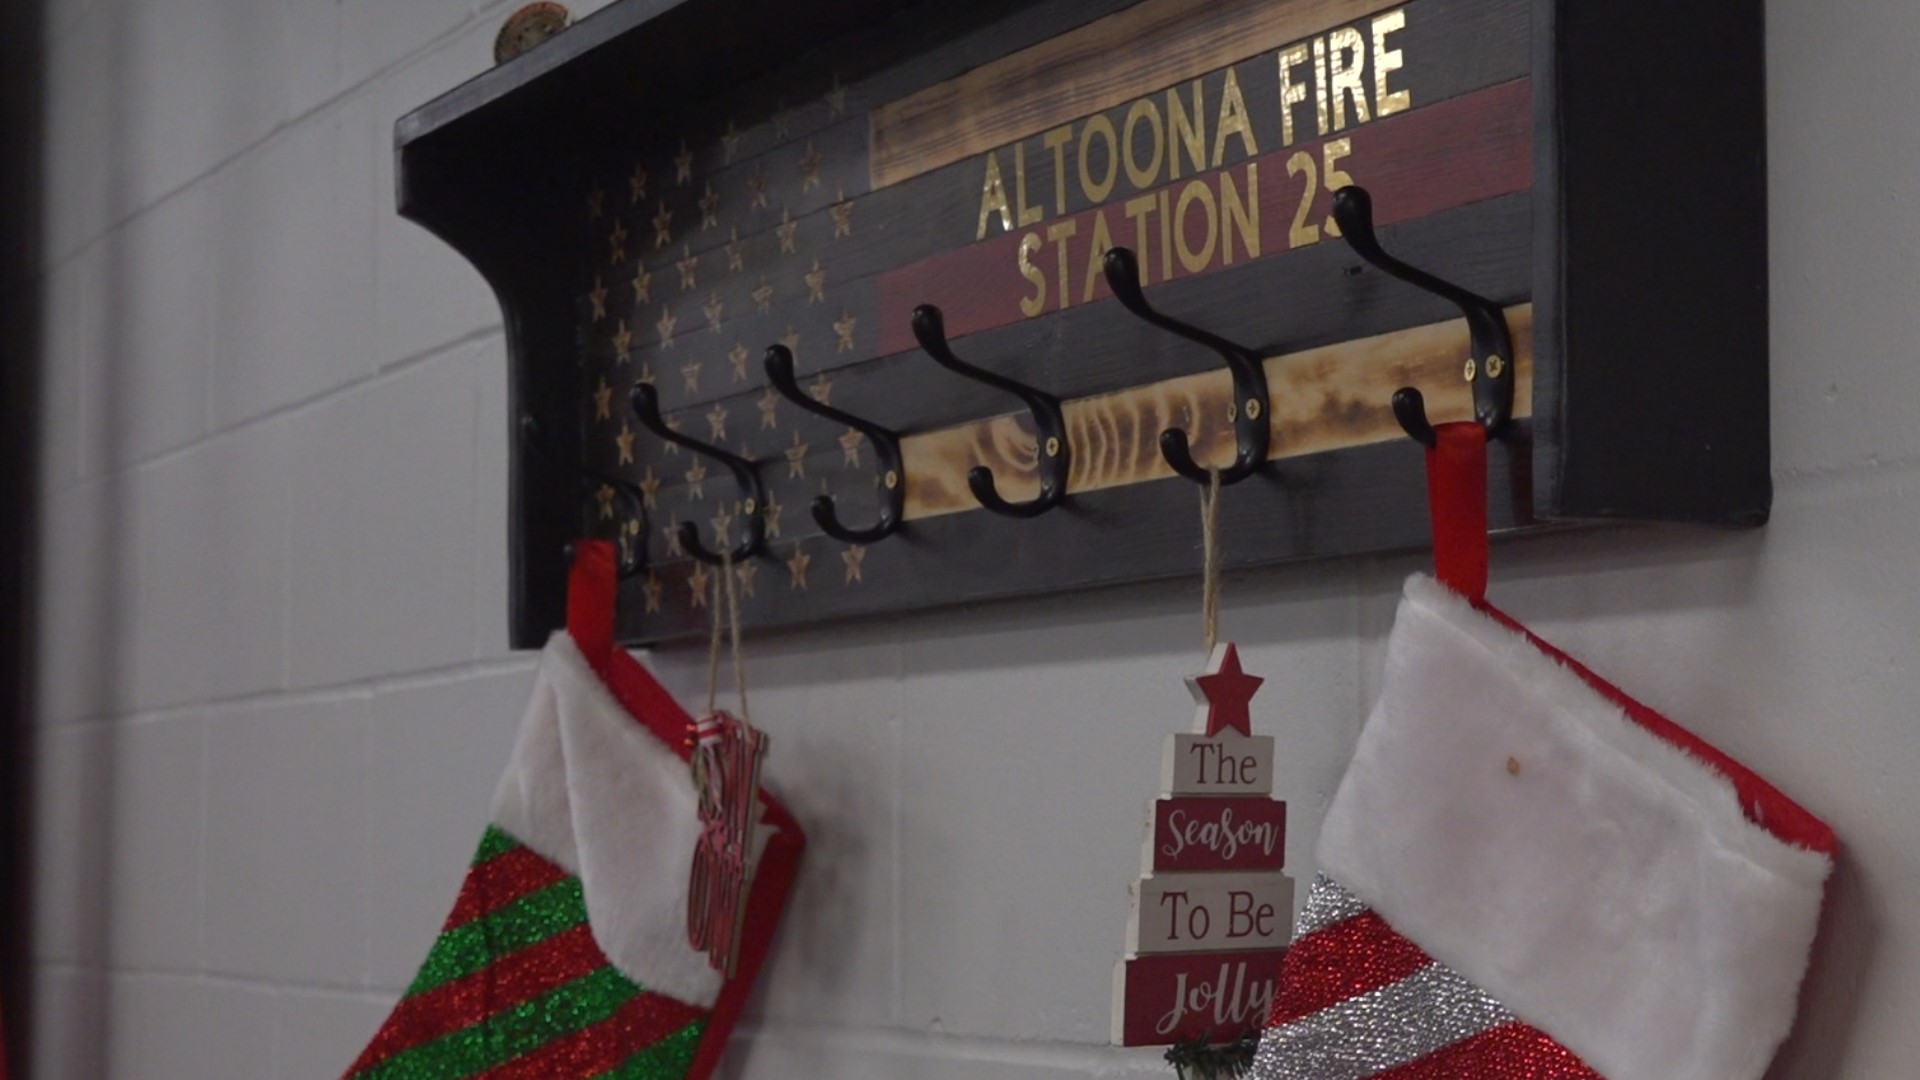 "It doesn't matter if it's a holiday, a weekend, weekday, whatever it is, stuff happens," Altoona Fire Department medic Chris Monley said.